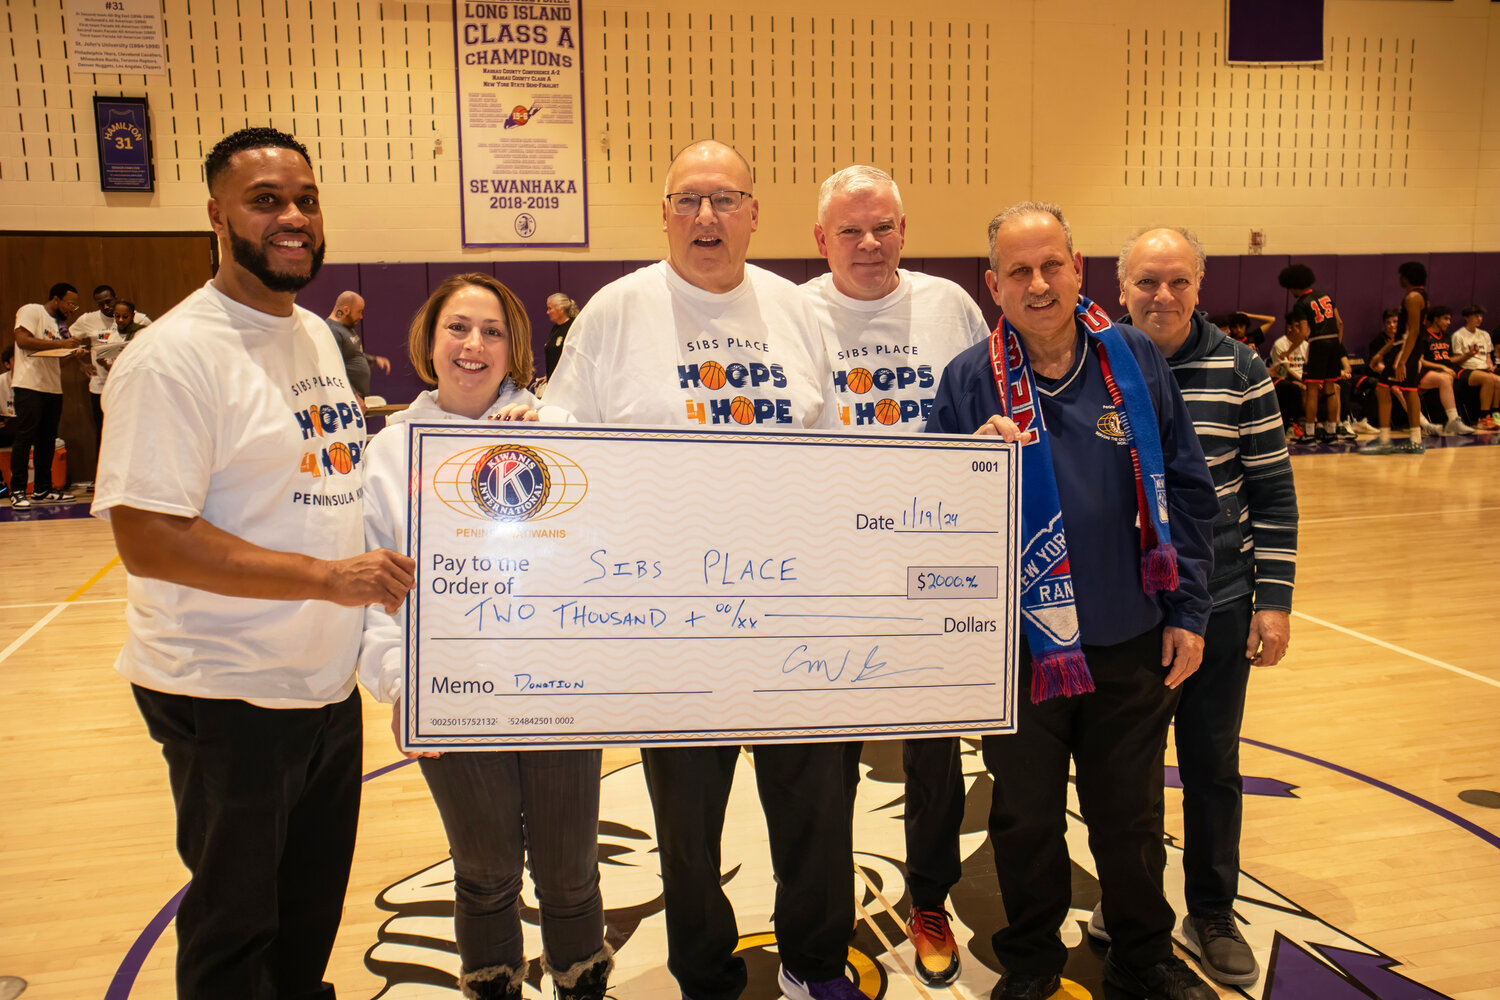 Sewanhaka basketball coach Jay Allen, SIBSPlace Executive Director Joanna Formont, Sewanhaka assistant coach Bill Dubin, Carey coach Dan Reece, former SIBSPlace President Michael Gliner and its secretary, Sheldon Soloway, with a check from the Peninsula Kiwanis Club for the 19th annual Hoops for Hope fundraiser.